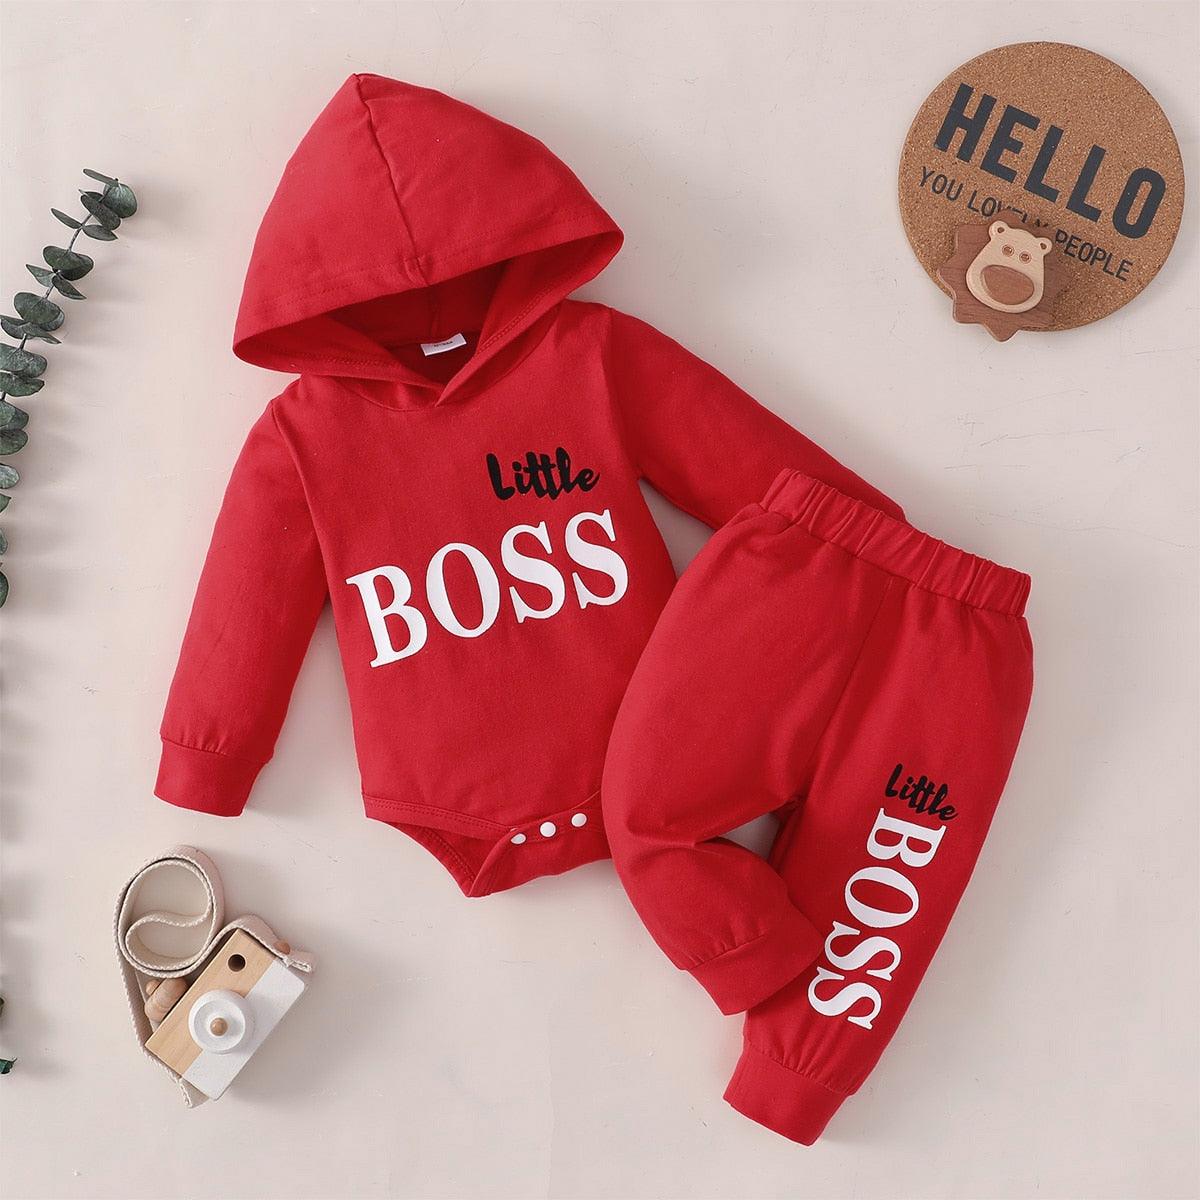 2pcs Newborn hooded Baby Boy Clothes - Try Modest Limited 